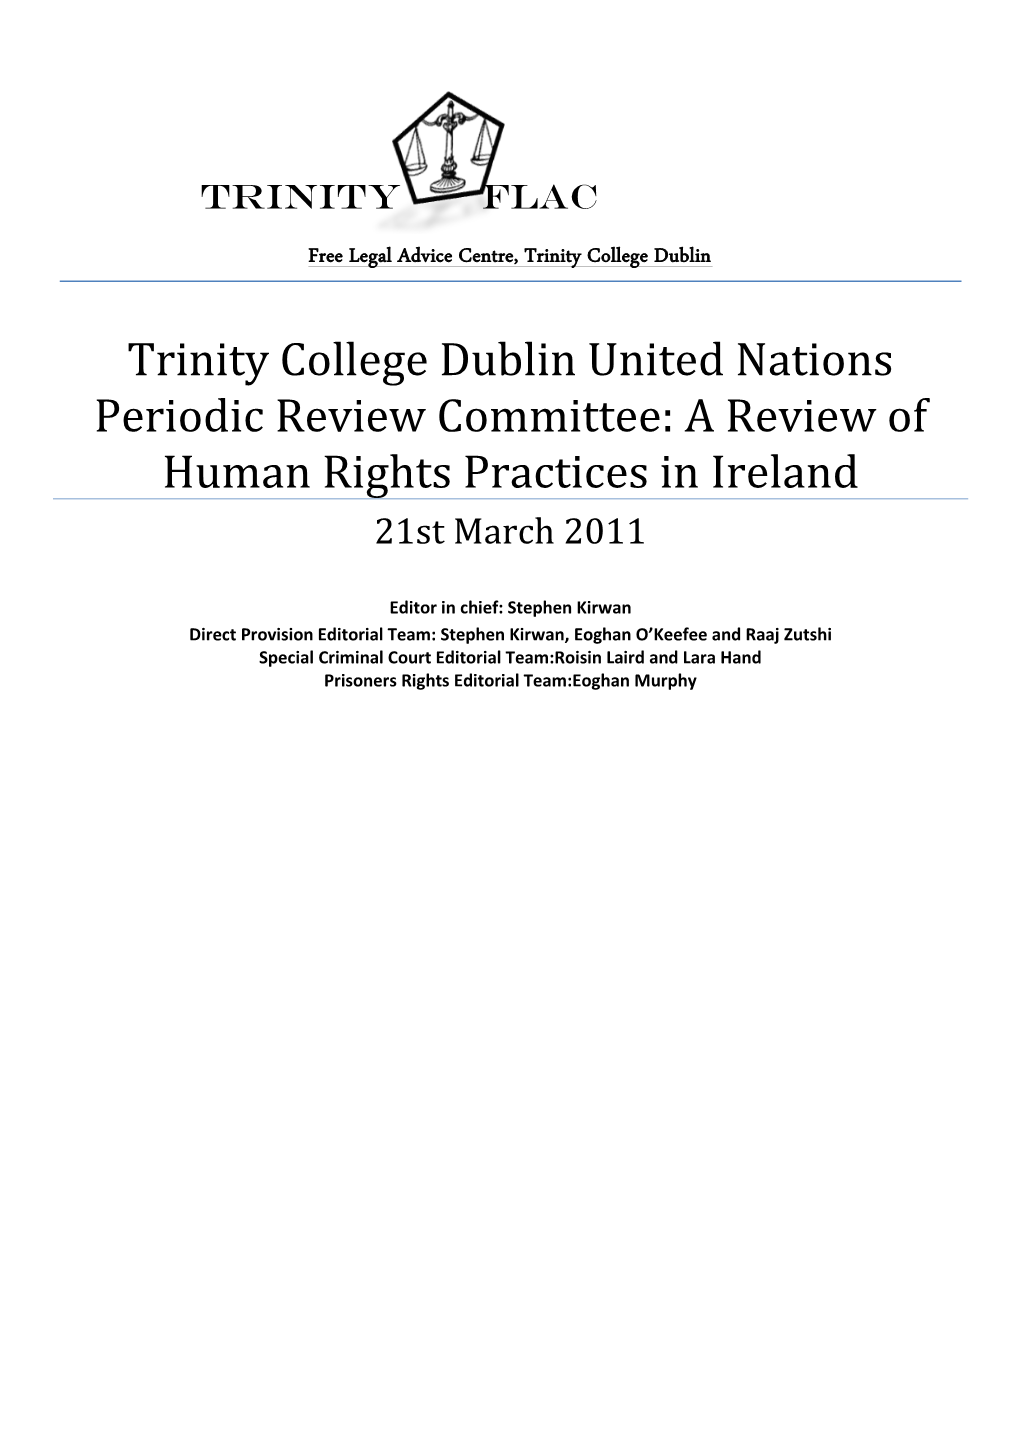 Trinity College Dublin United Nations Periodic Review Committee: a Review of Human Rights Practices in Ireland 21St March 2011